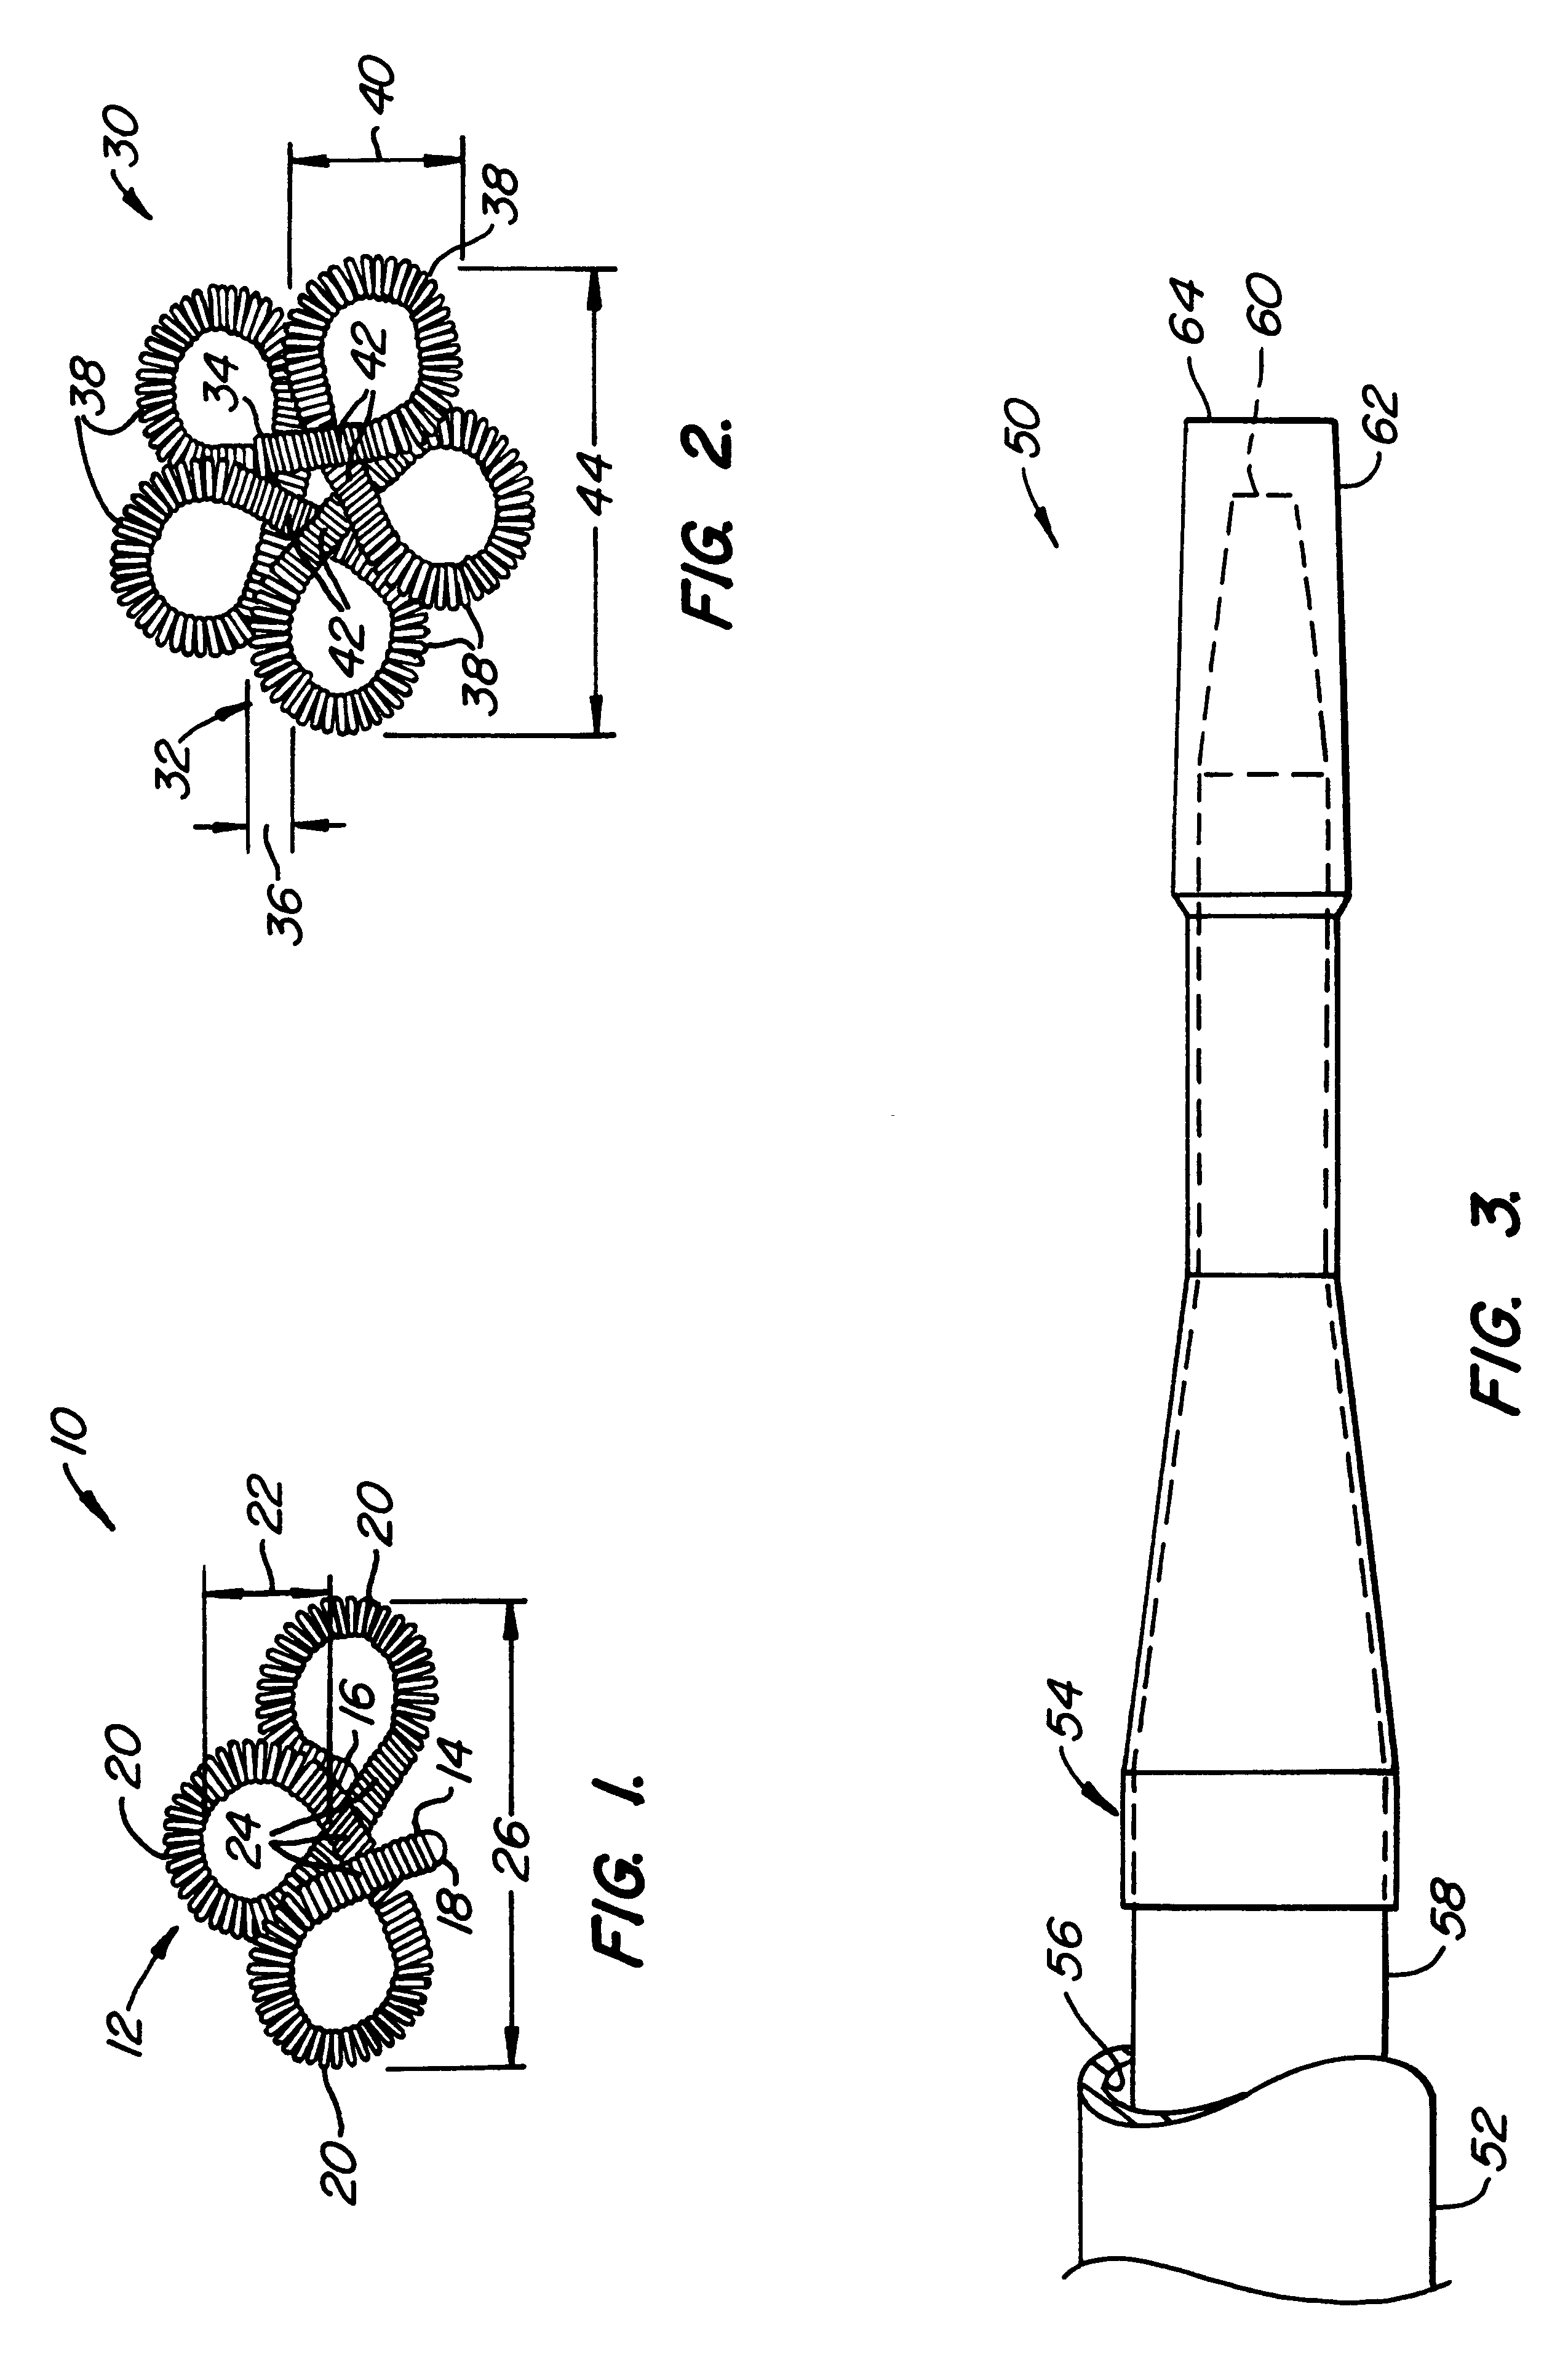 Contraceptive transcervical fallopian tube occlusion devices and their delivery